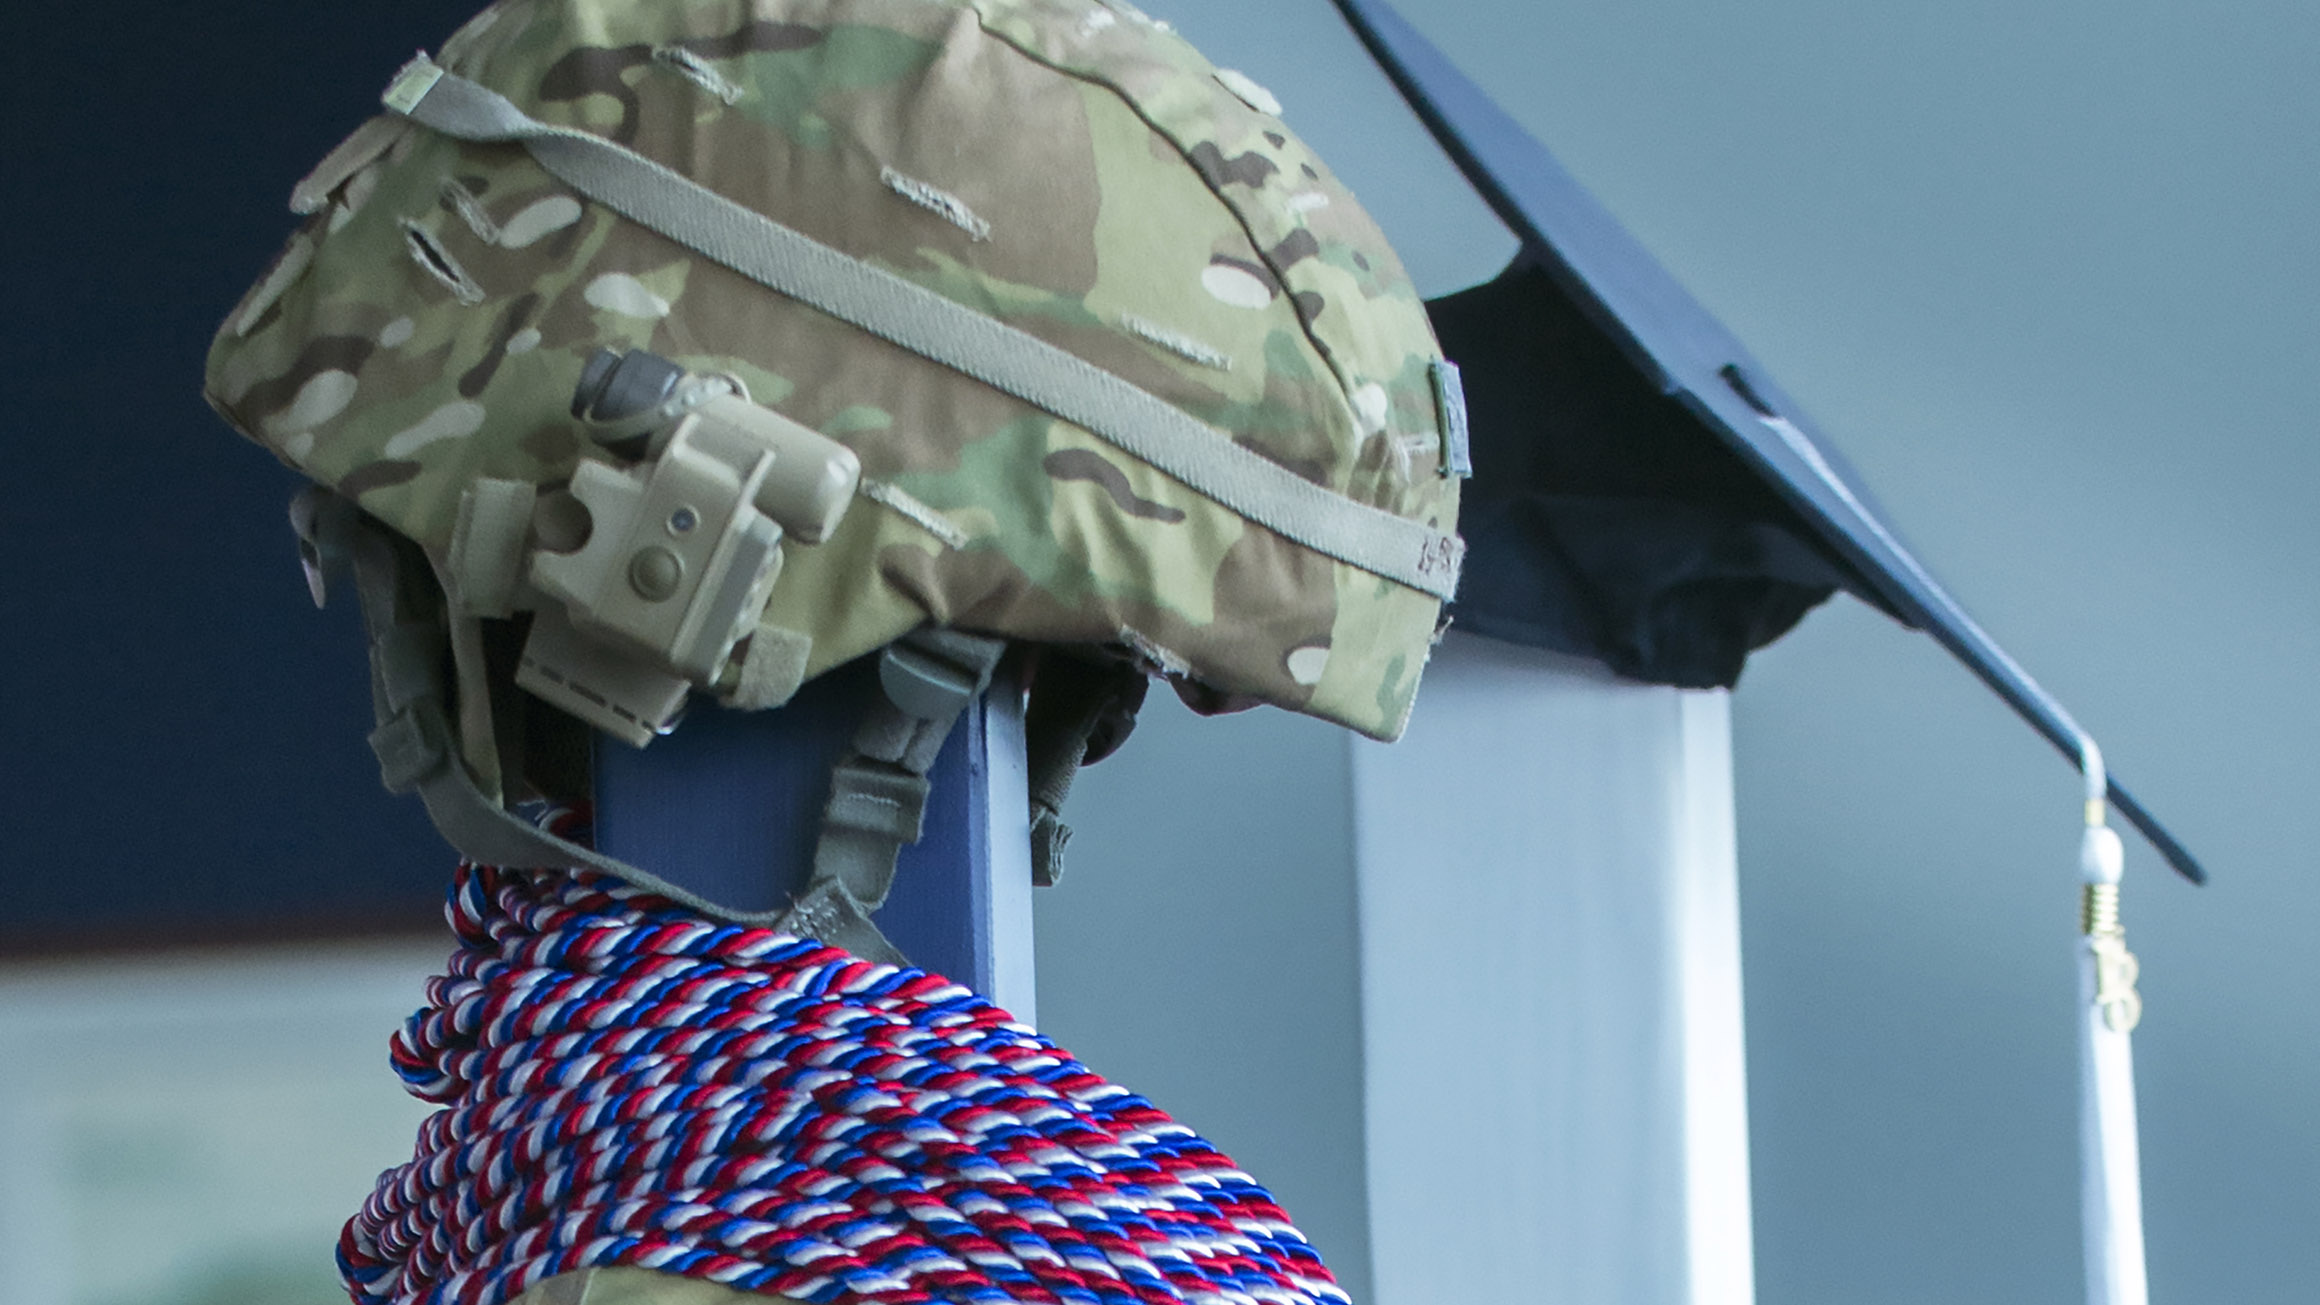 Military helmet on stand with military honor cords